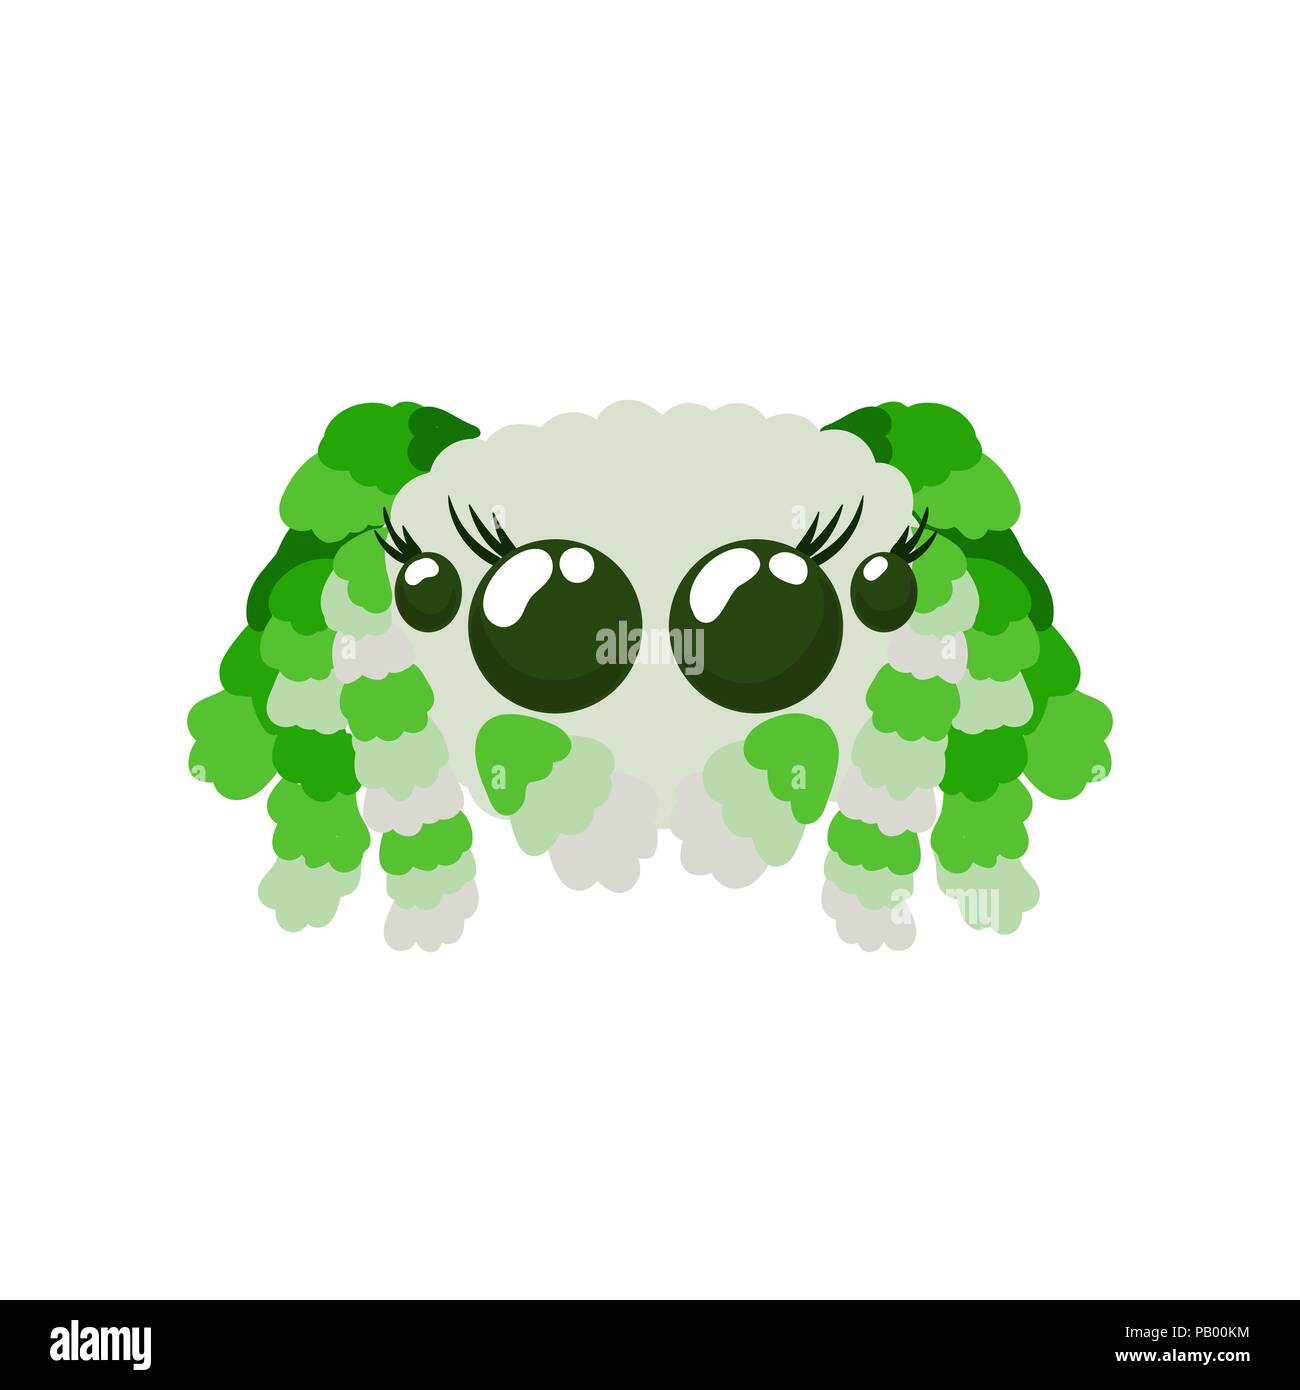 Peacock spider cute vector illustration in green colors not scary friendly arachnid Stock Vector